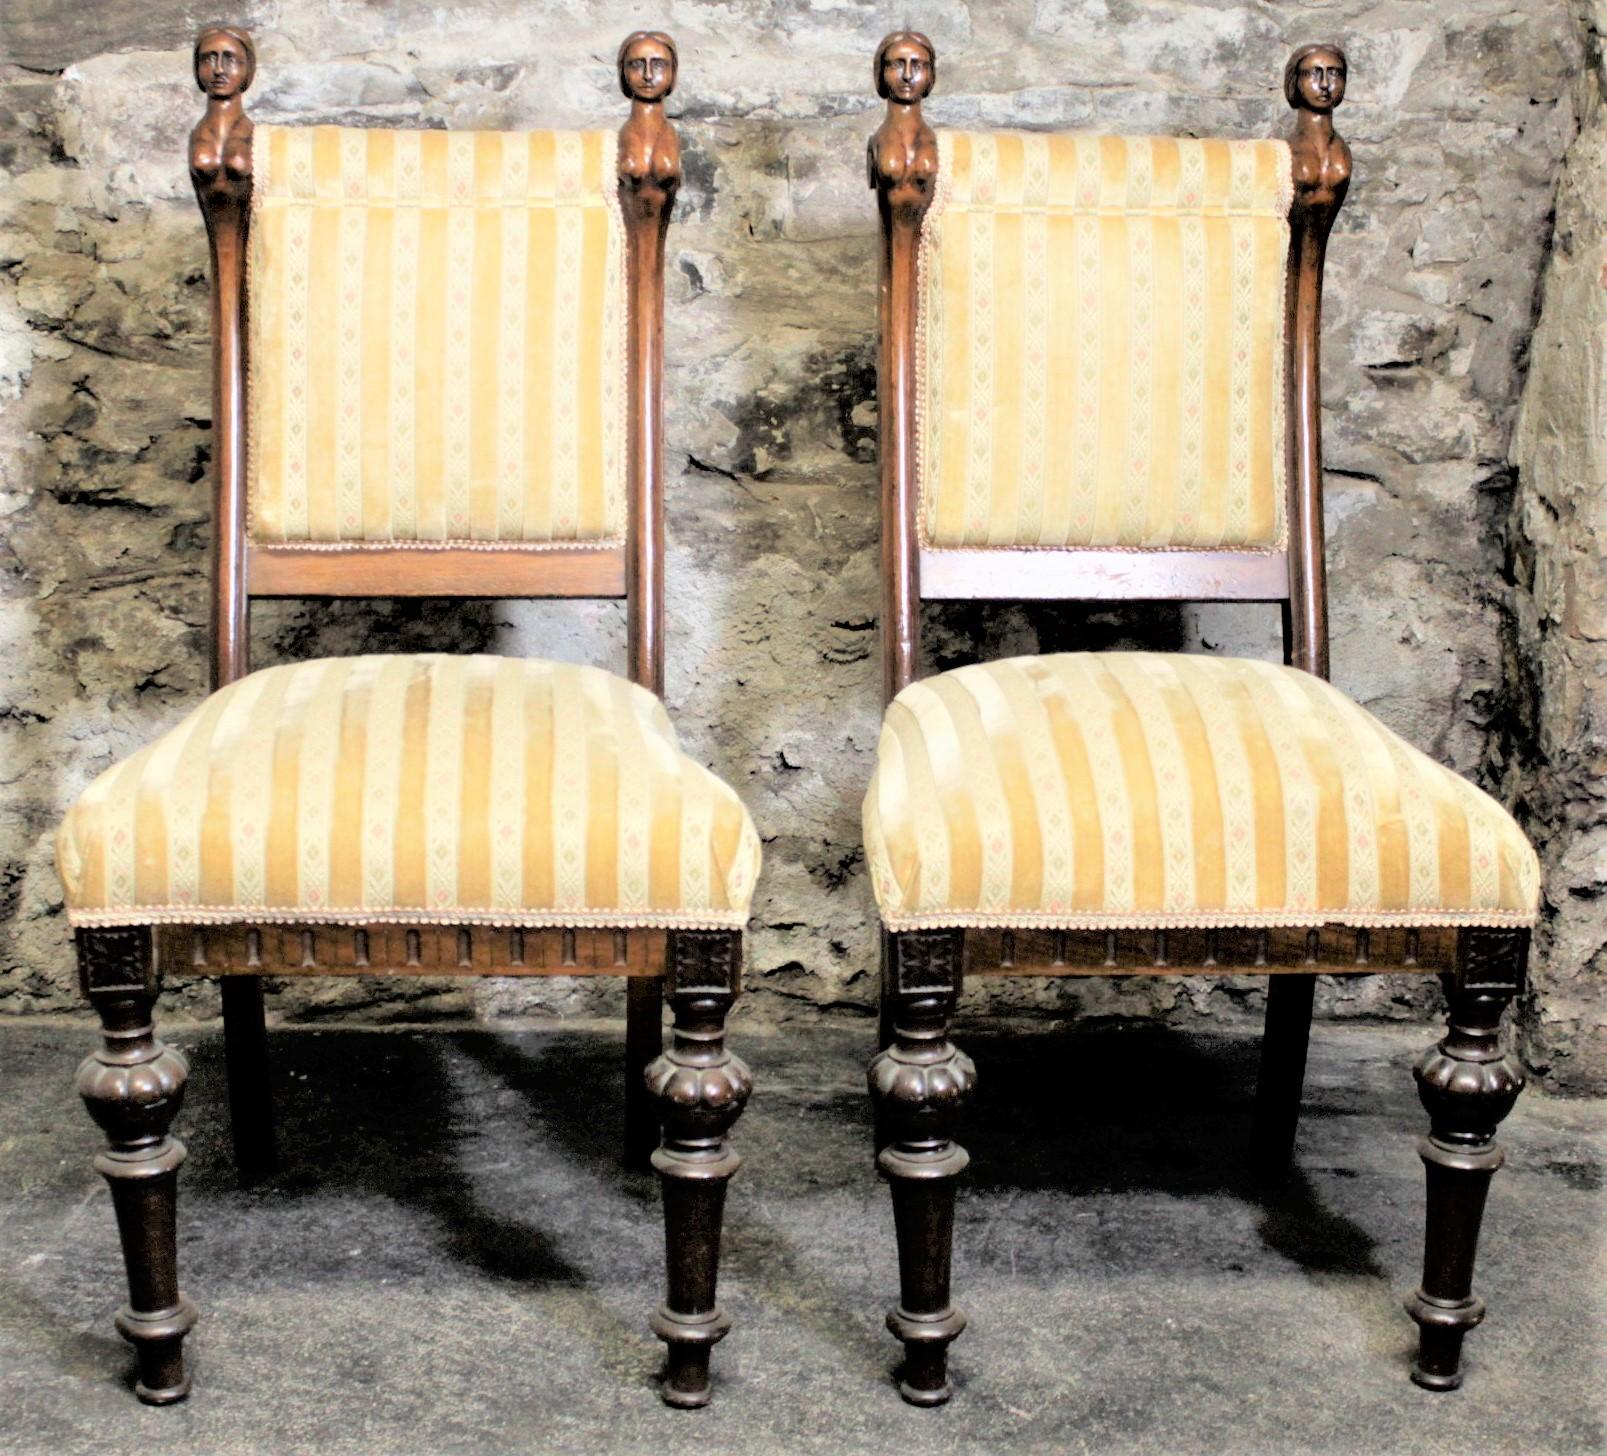 This pair of antique chairs is unsigned but believed to have been made in the United States in circa 1880 in the Victorian style. The chairs have hand carved wooden frames and feature two ornately carved busty figural females with blank stares on